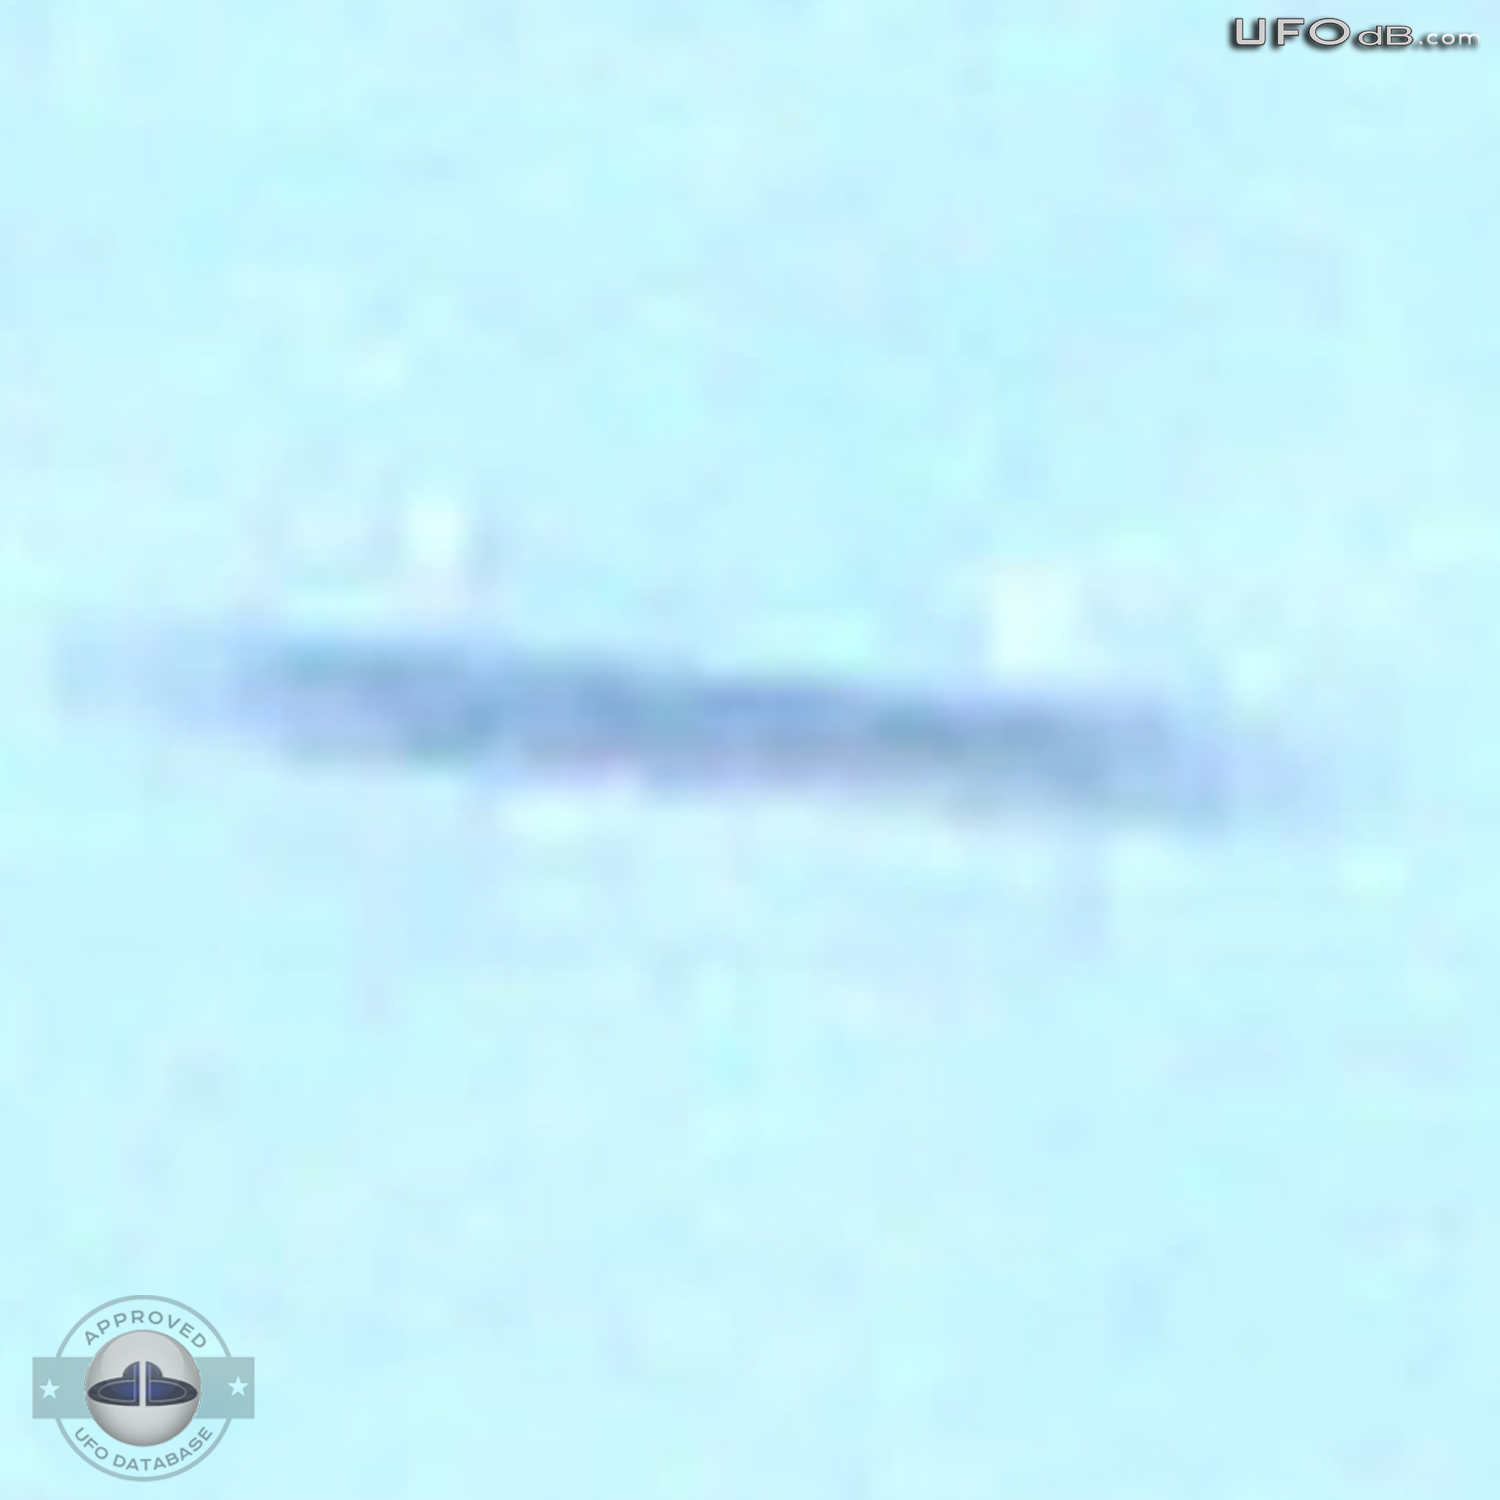 Colombia Saucer flying over the hills caught on picture | March 3 2003 UFO Picture #322-4